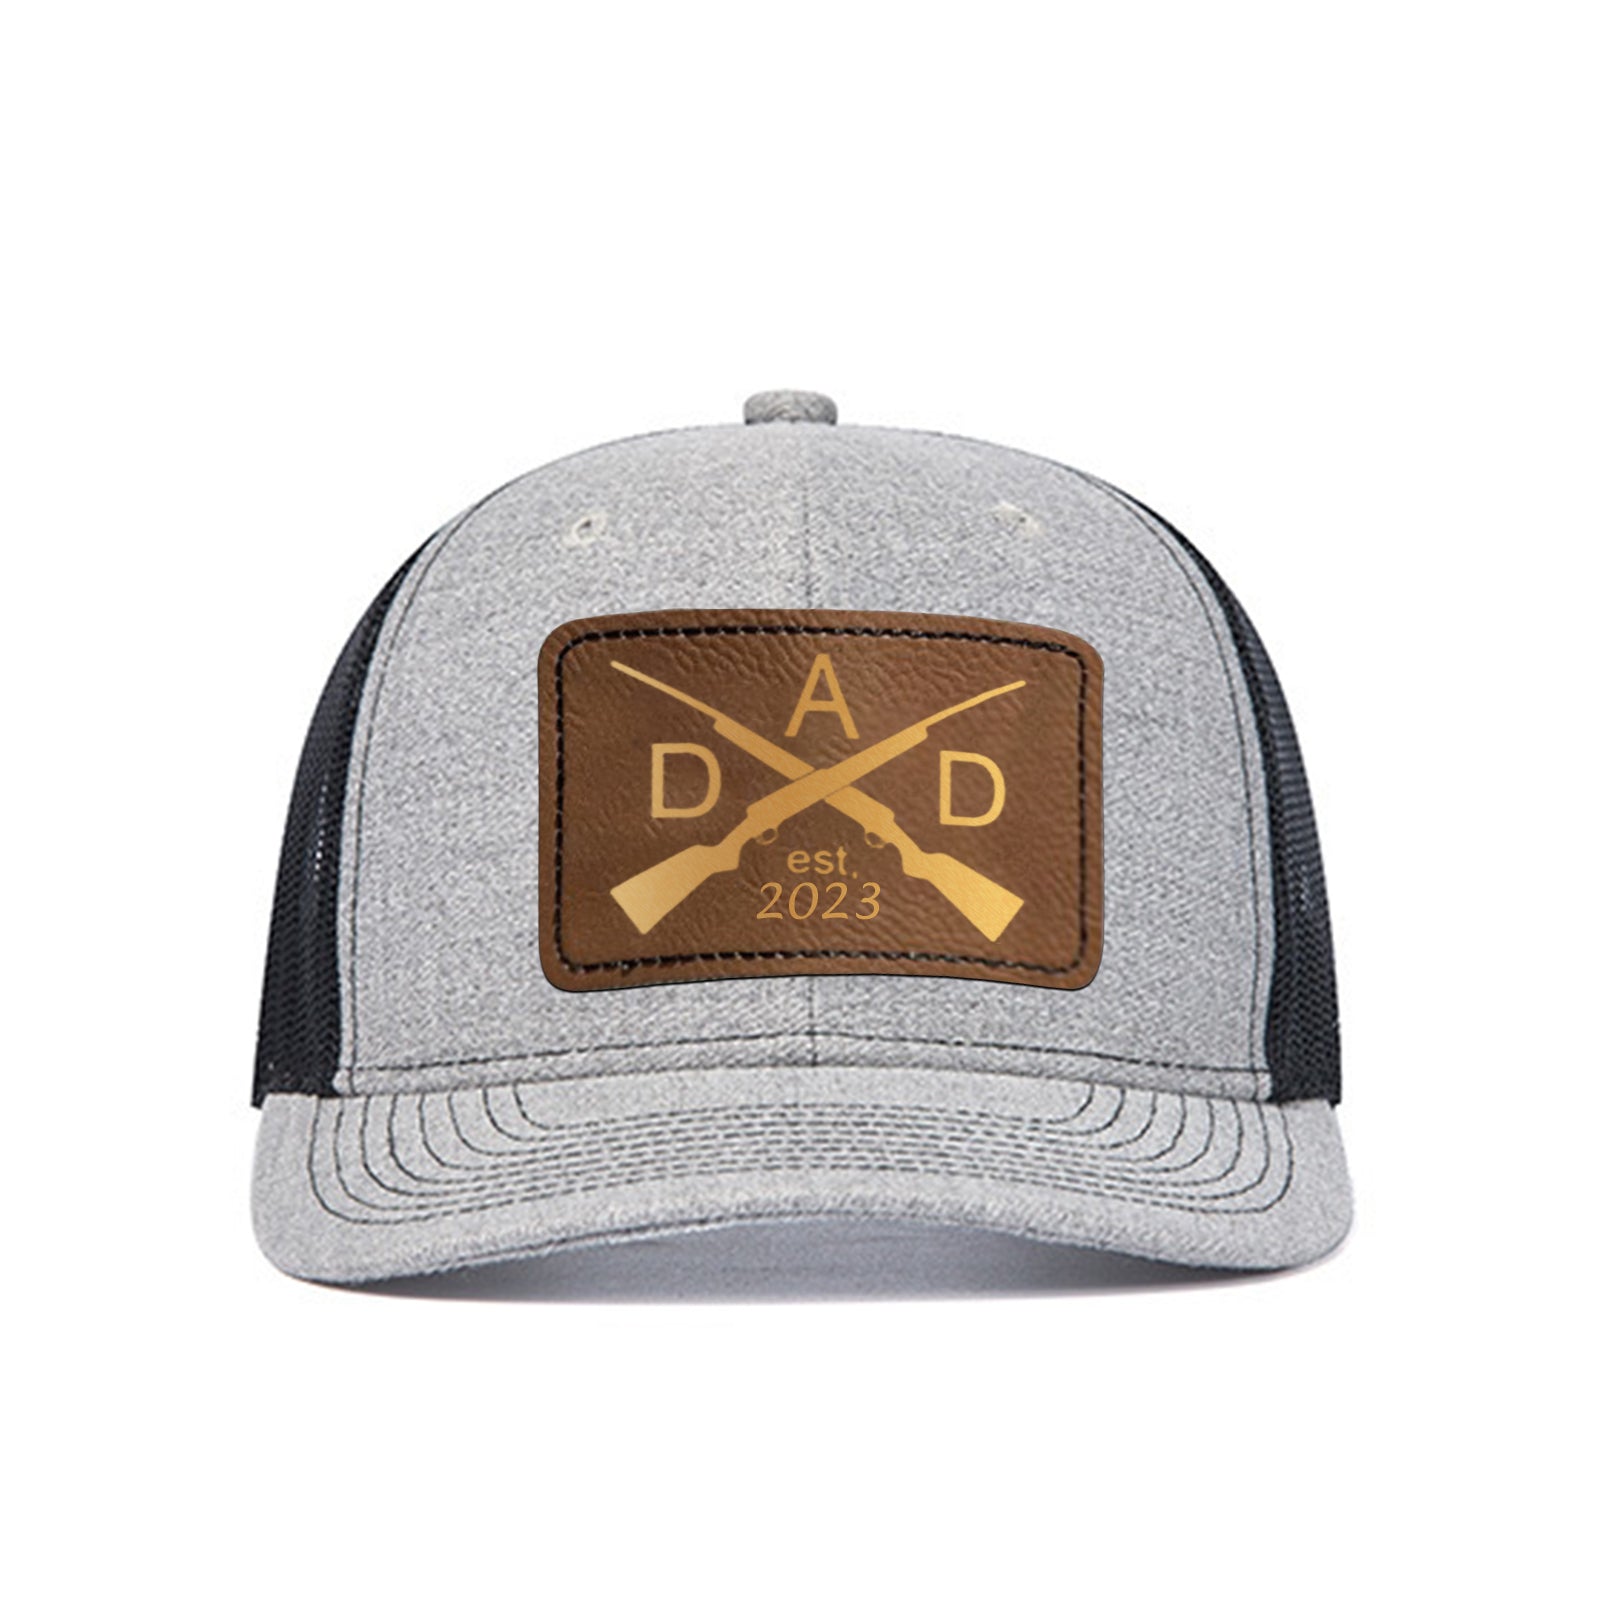 A gray CrealityFalcon 2 pcs Adjustable Mesh Trucker Hat with 4pcs Cap Stickers for Engraving with a black mesh back features a brown patch on the front. The patch shows two crossed rifles and the word "DAD" in large letters, with "est. 2023" written below. This makes for a perfect gift for men who love style and functionality.